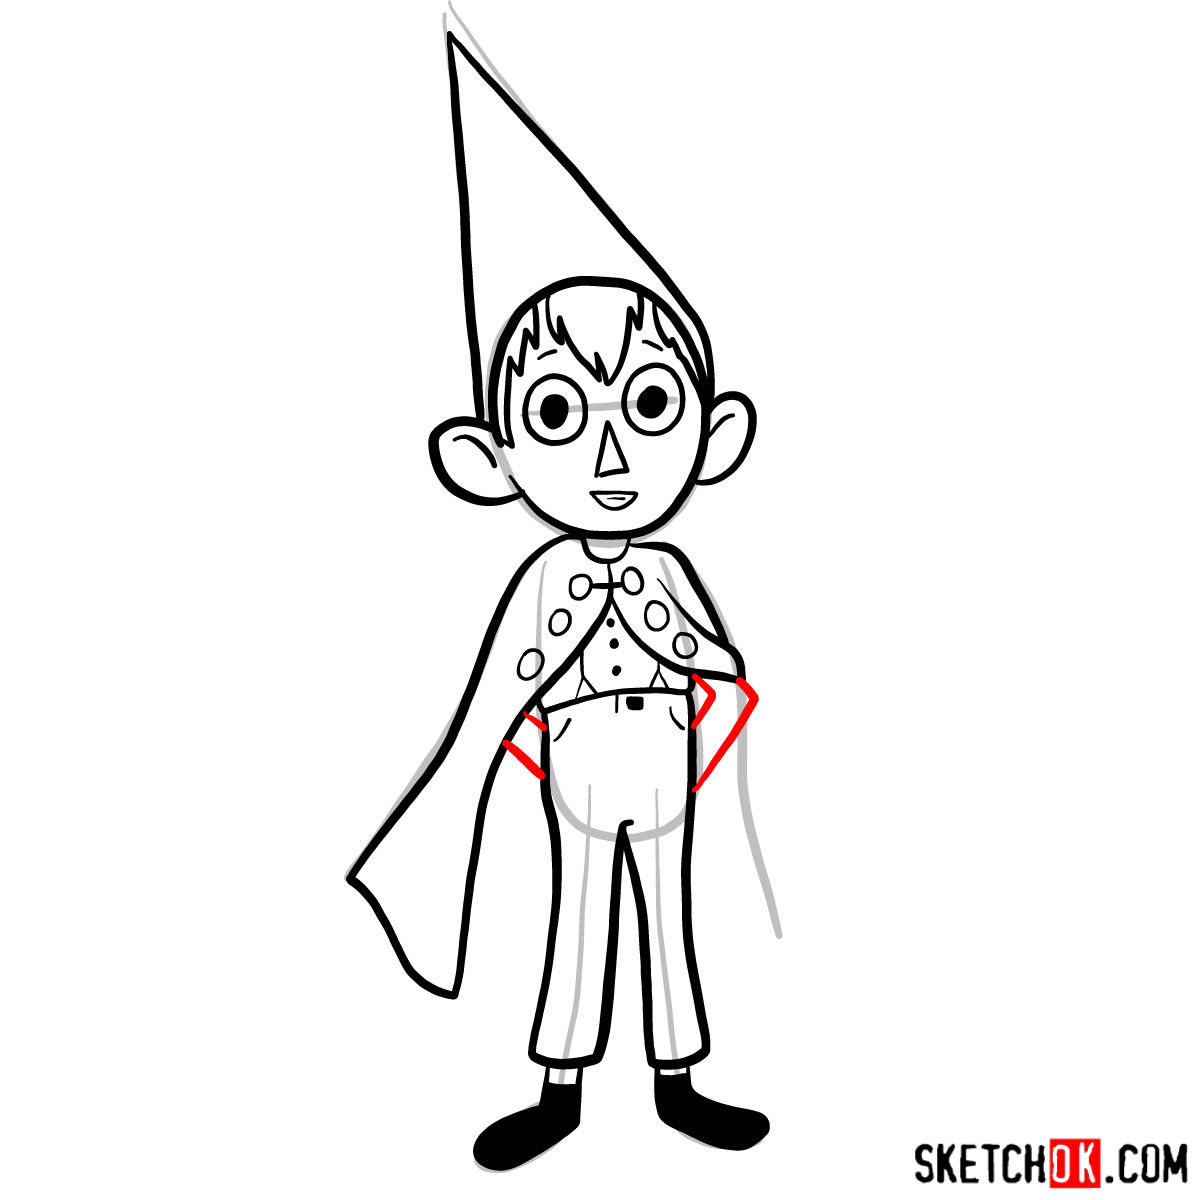 How to draw Wirt from Over the Garden Wall